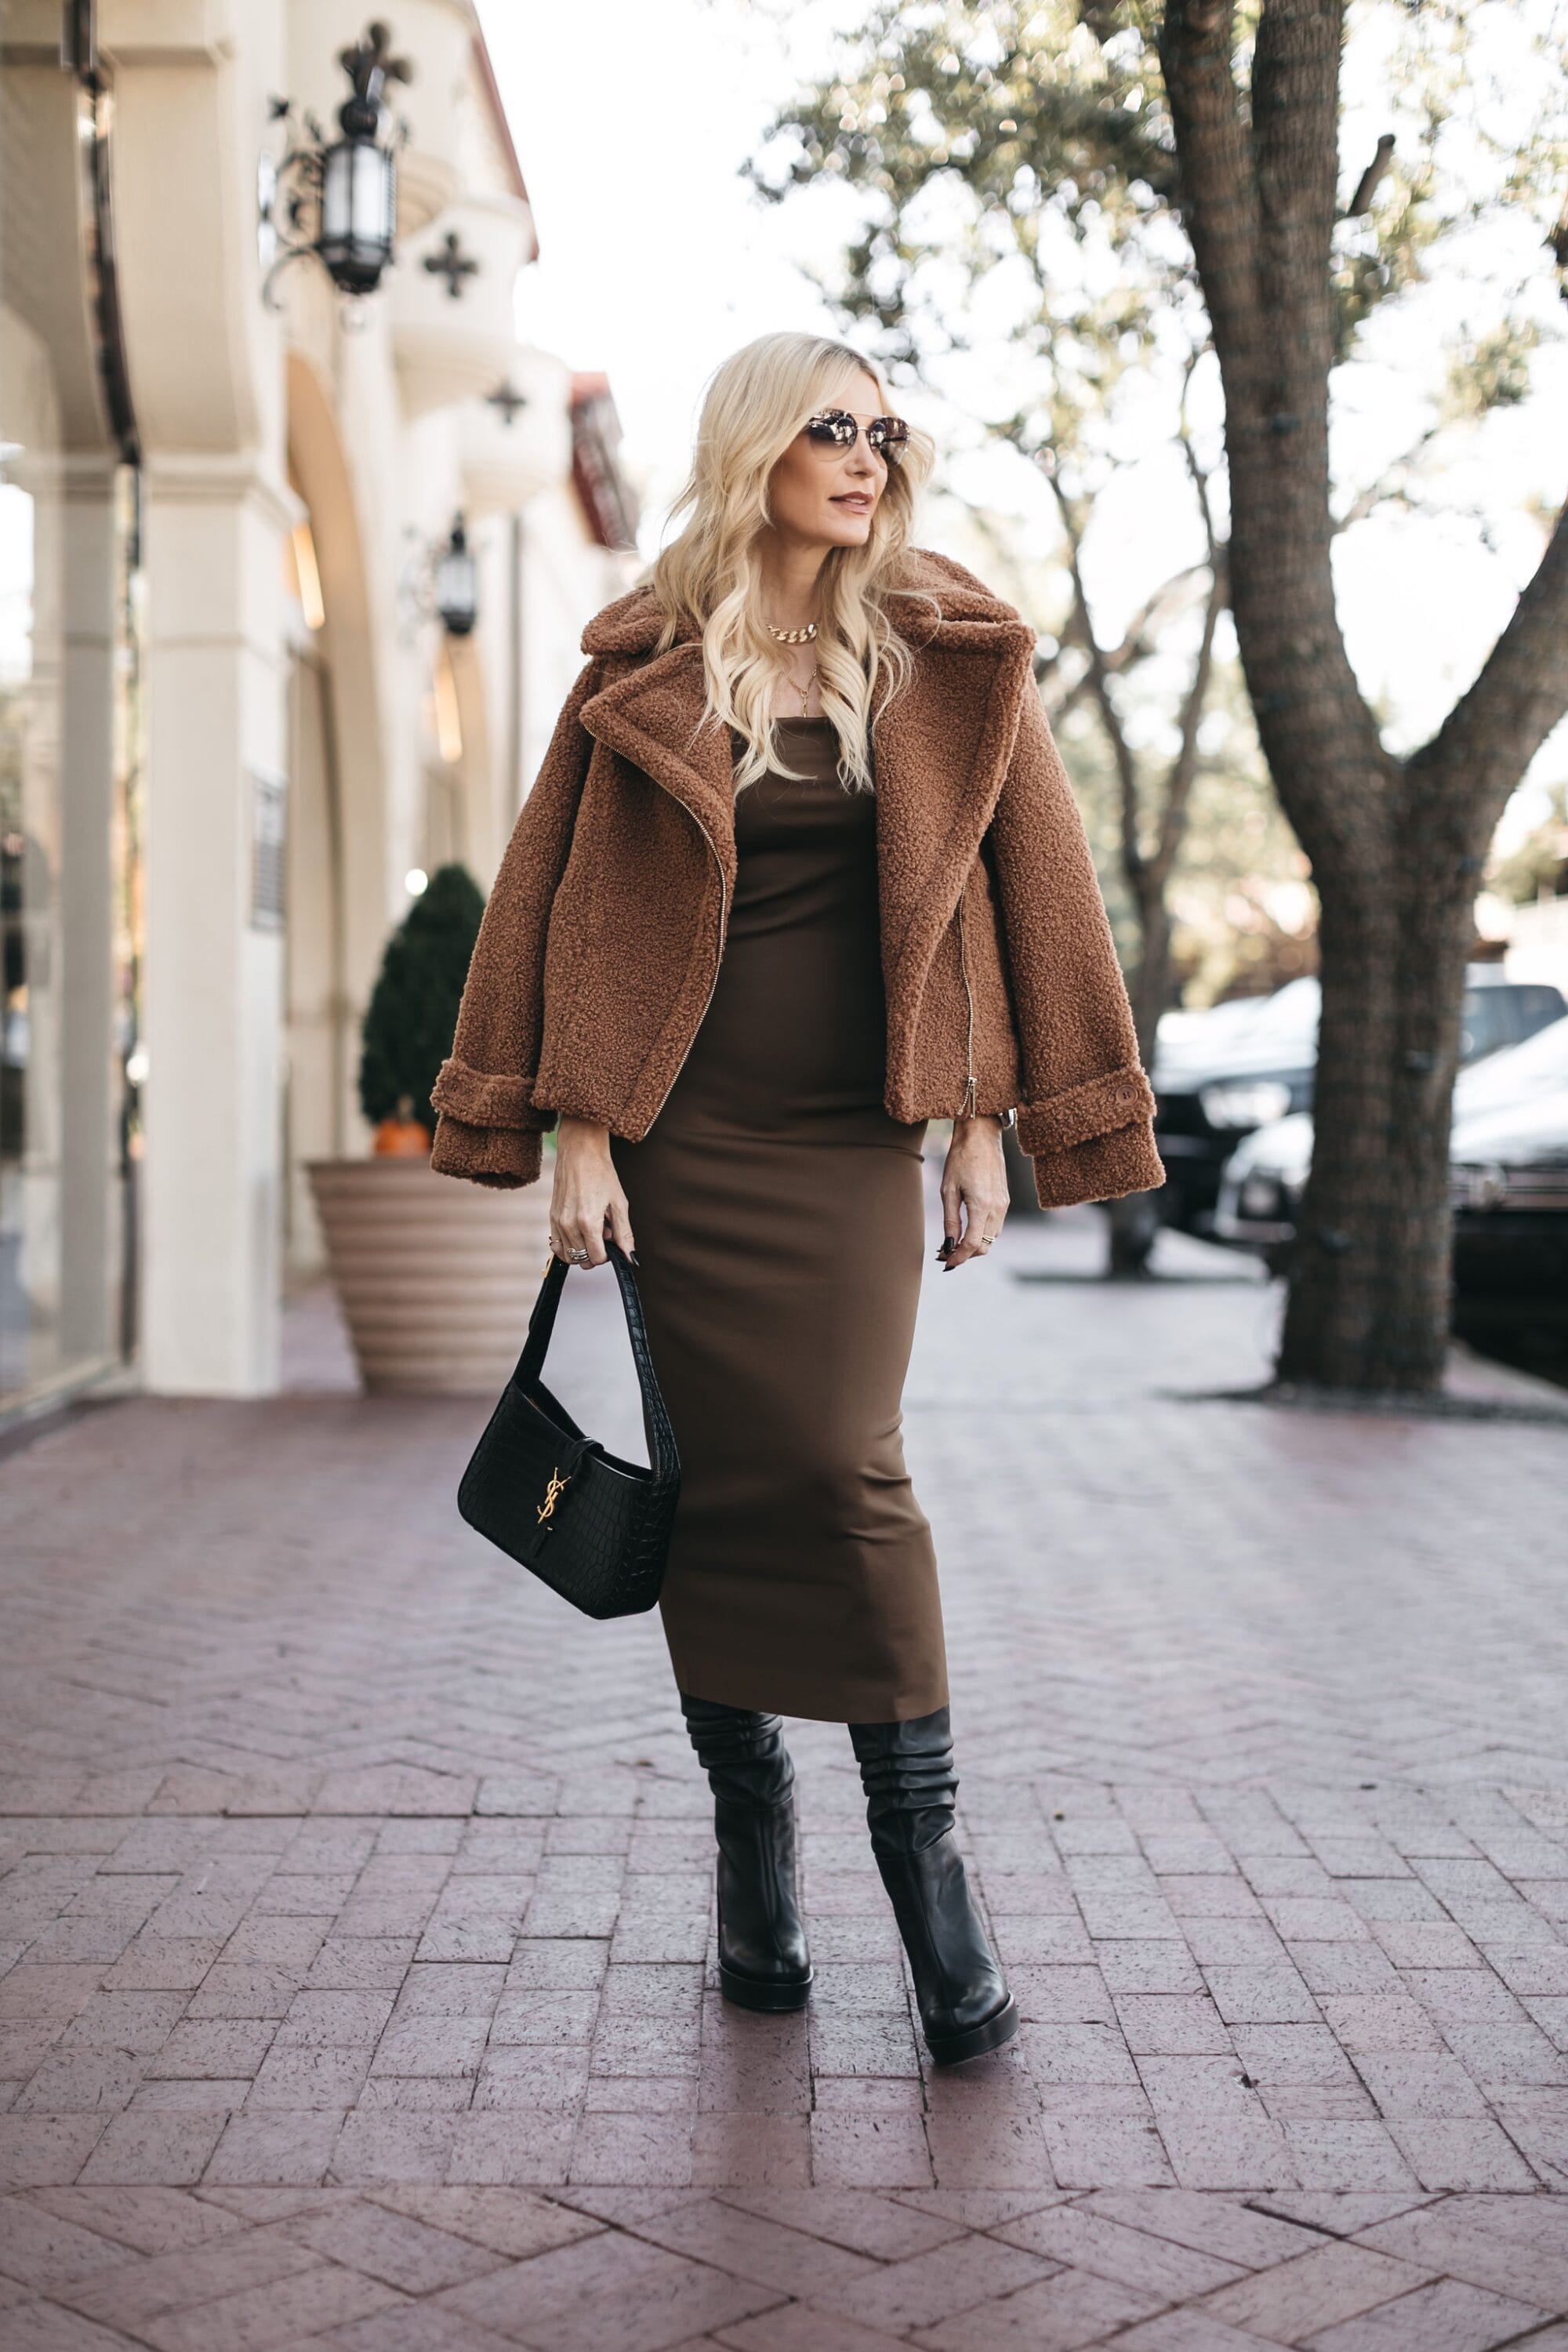 Dallas fashion blogger wearing brown midi dress as one of the best selling items in November 2022.